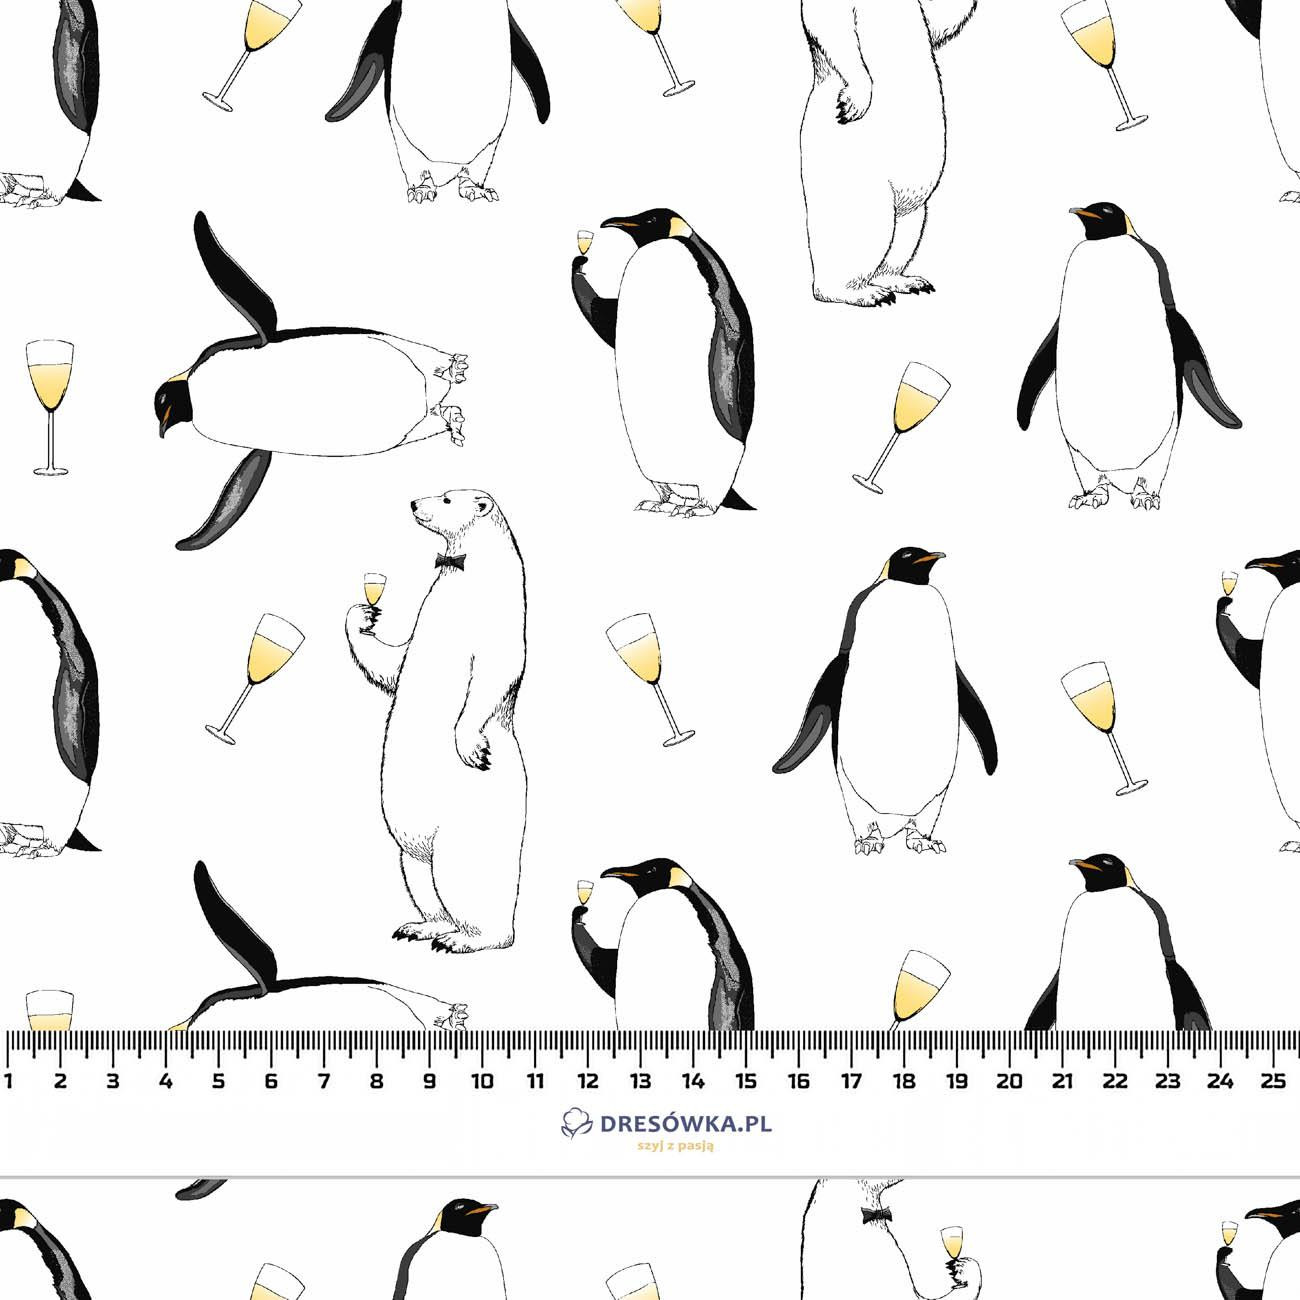 ARCTIC PARTY - Cotton woven fabric